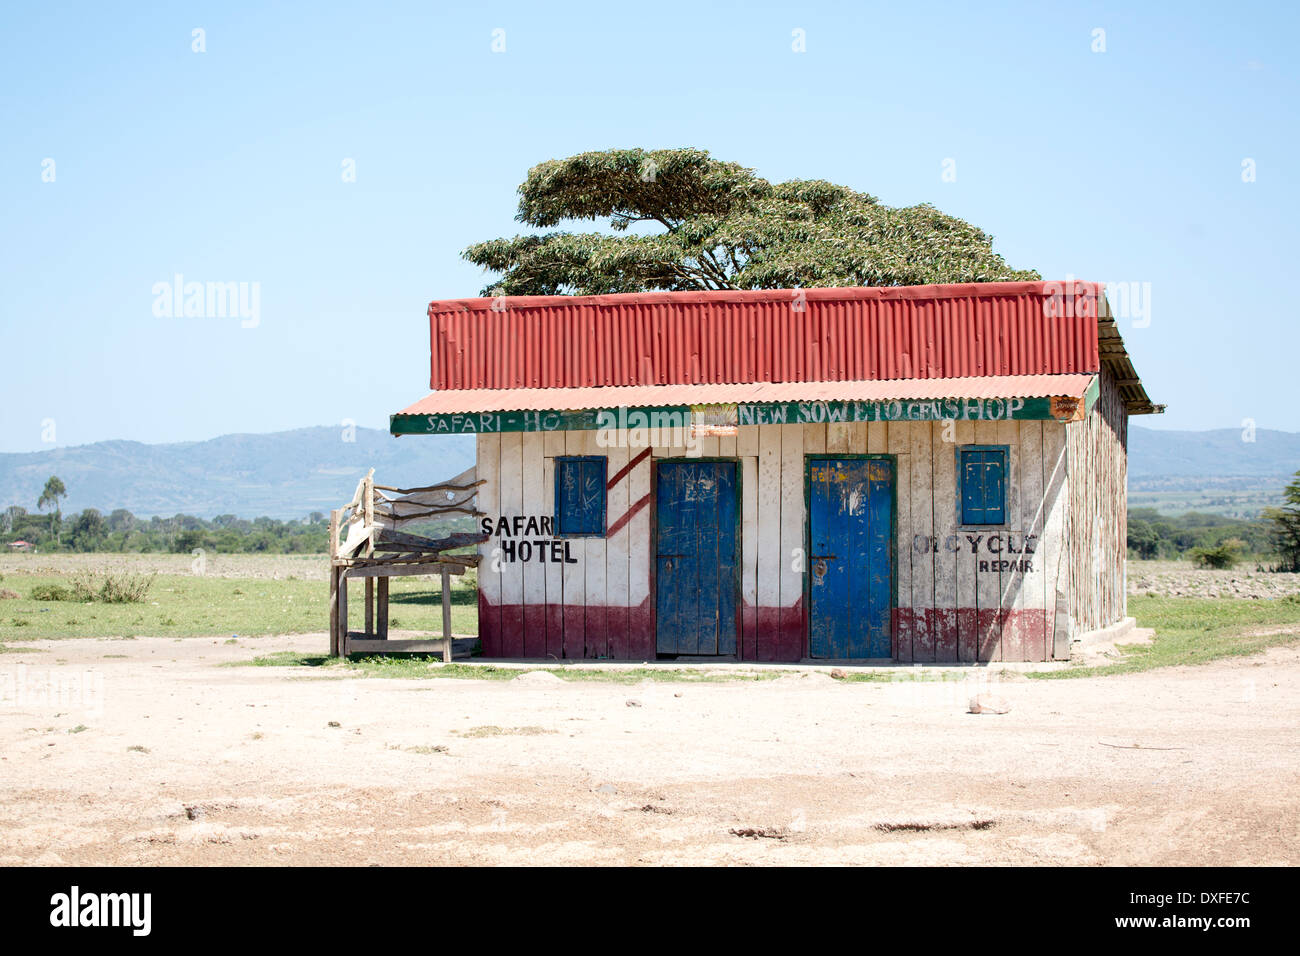 Image of the compact Safari hotel situated in the Masai Mara Kenya next door to the Soweto General store and cycle repair shop Stock Photo